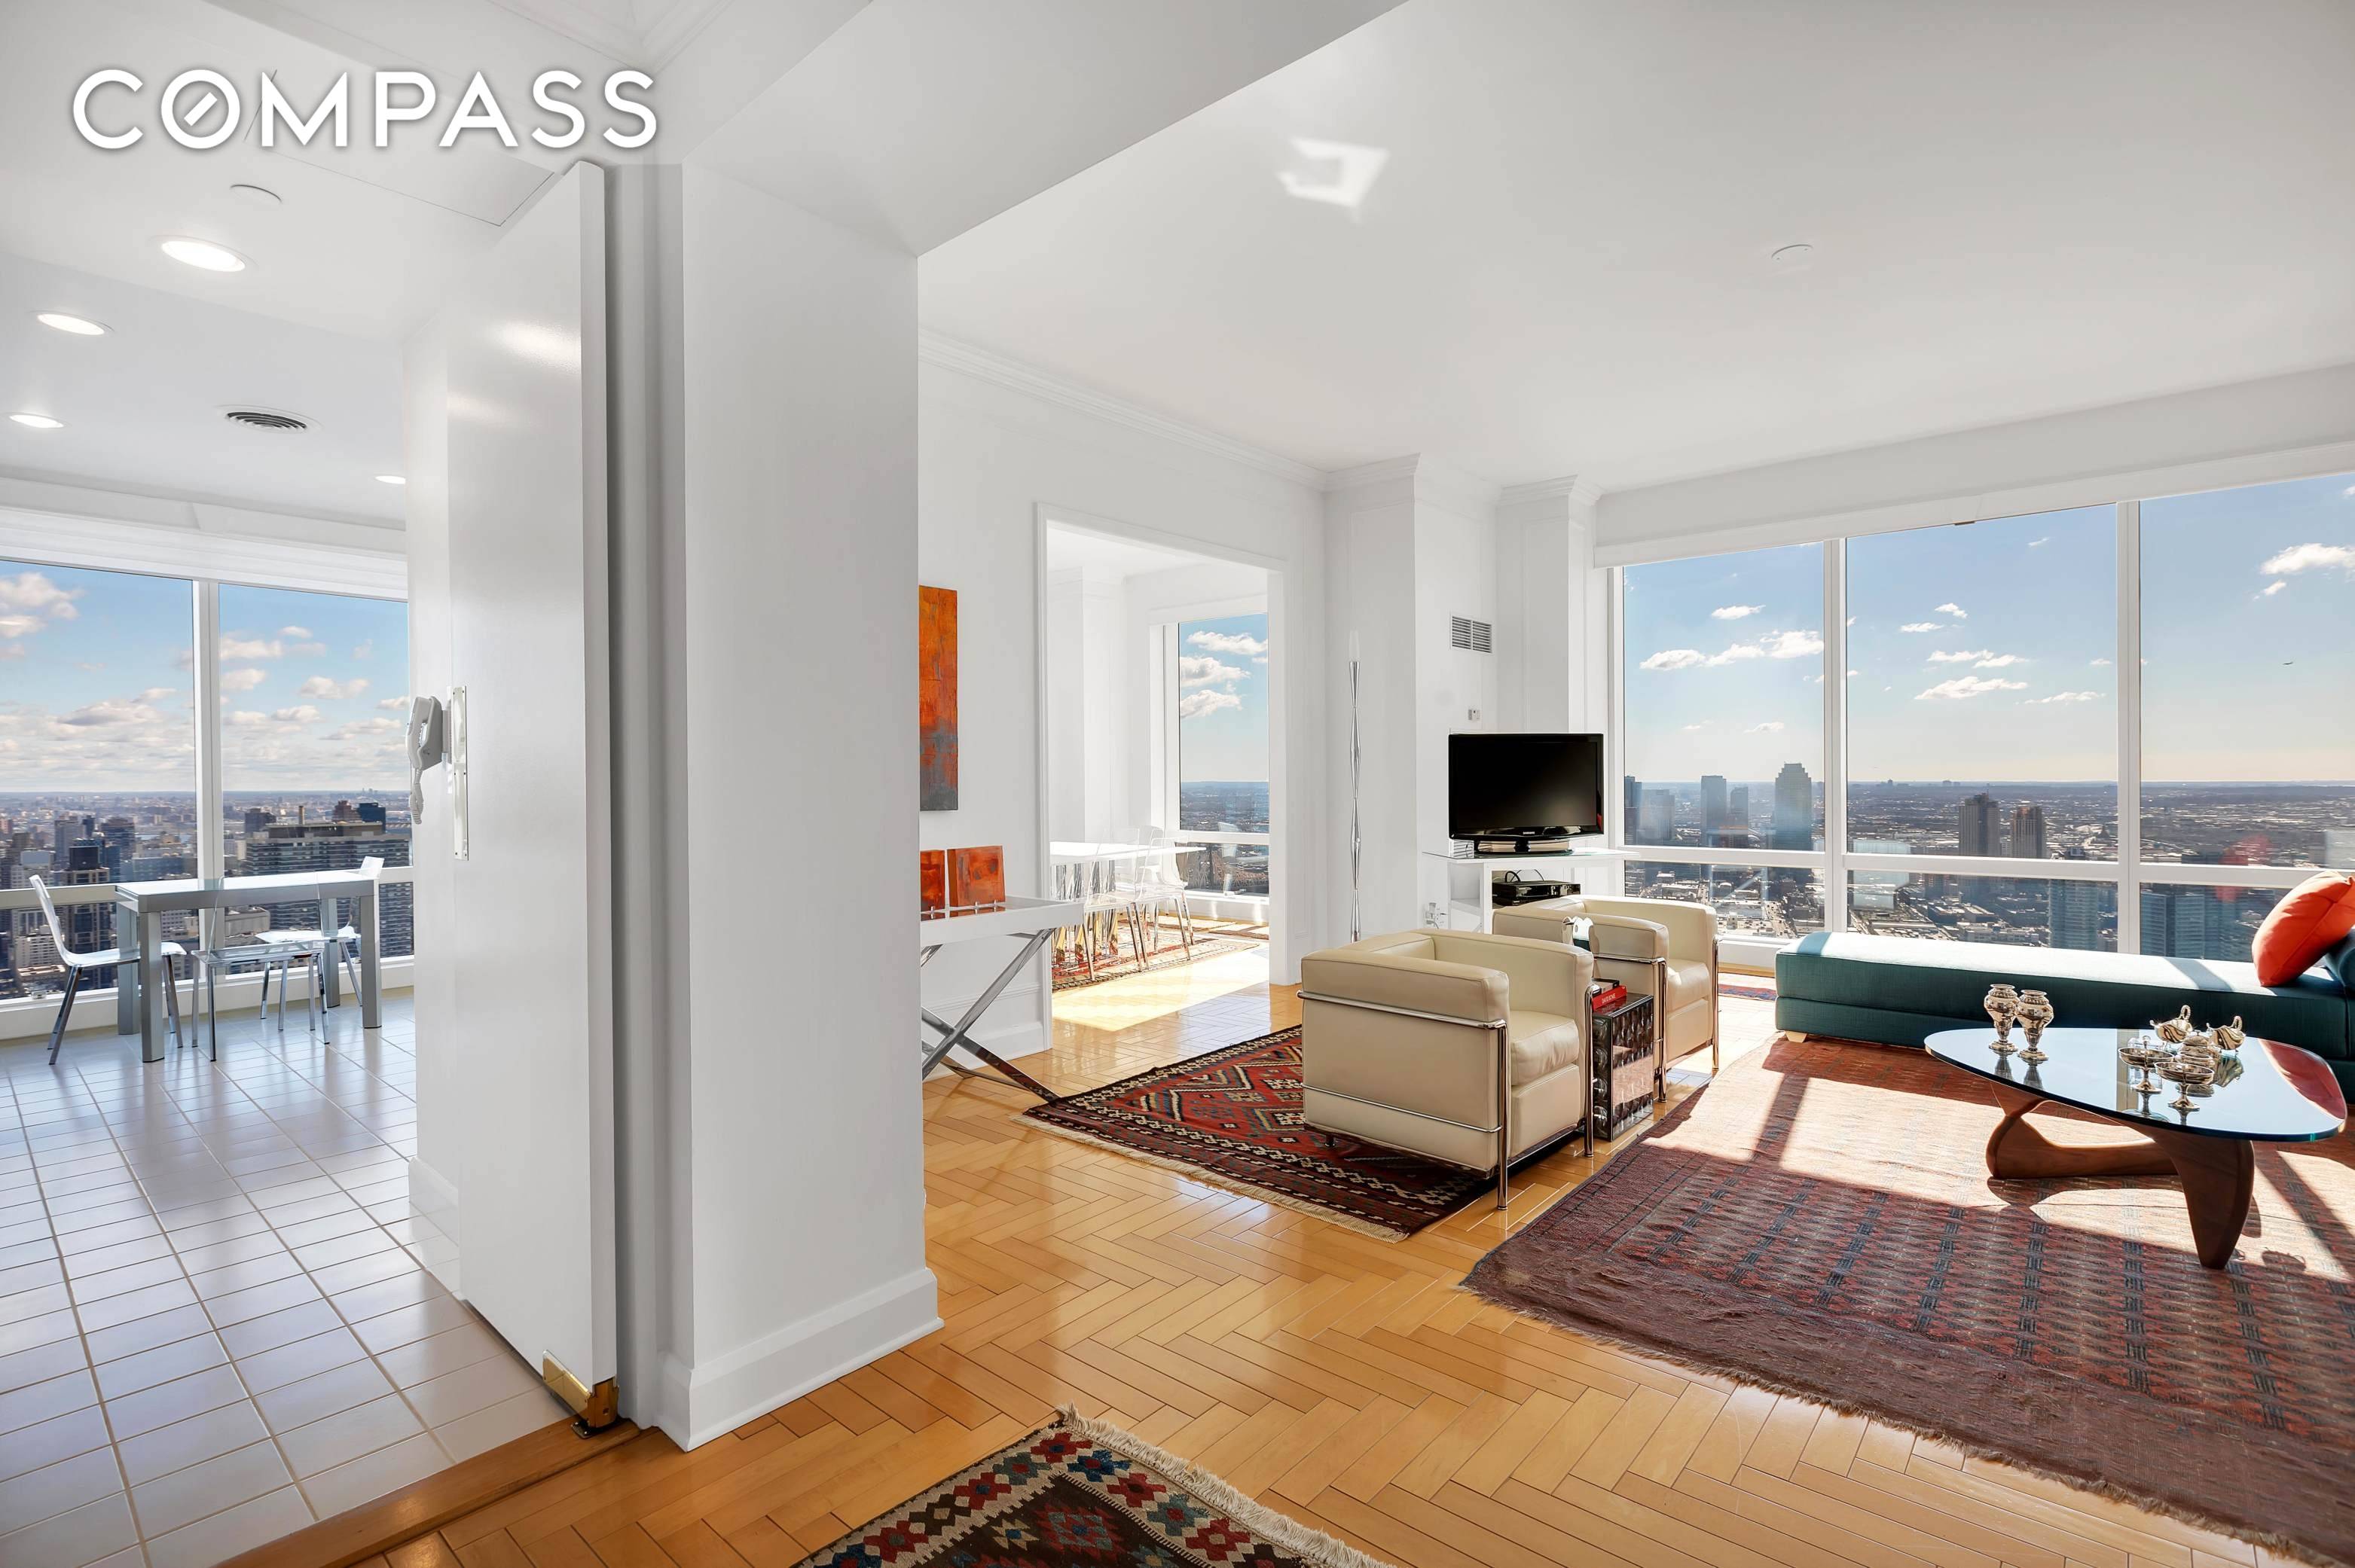 ELEGANT HOME WITH BREATHTAKING VIEWSWonderful views of the East River, the Edward Koch Bridge The 59th Street Bridge, and the city from this beautiful, large, five room residence sited on ...